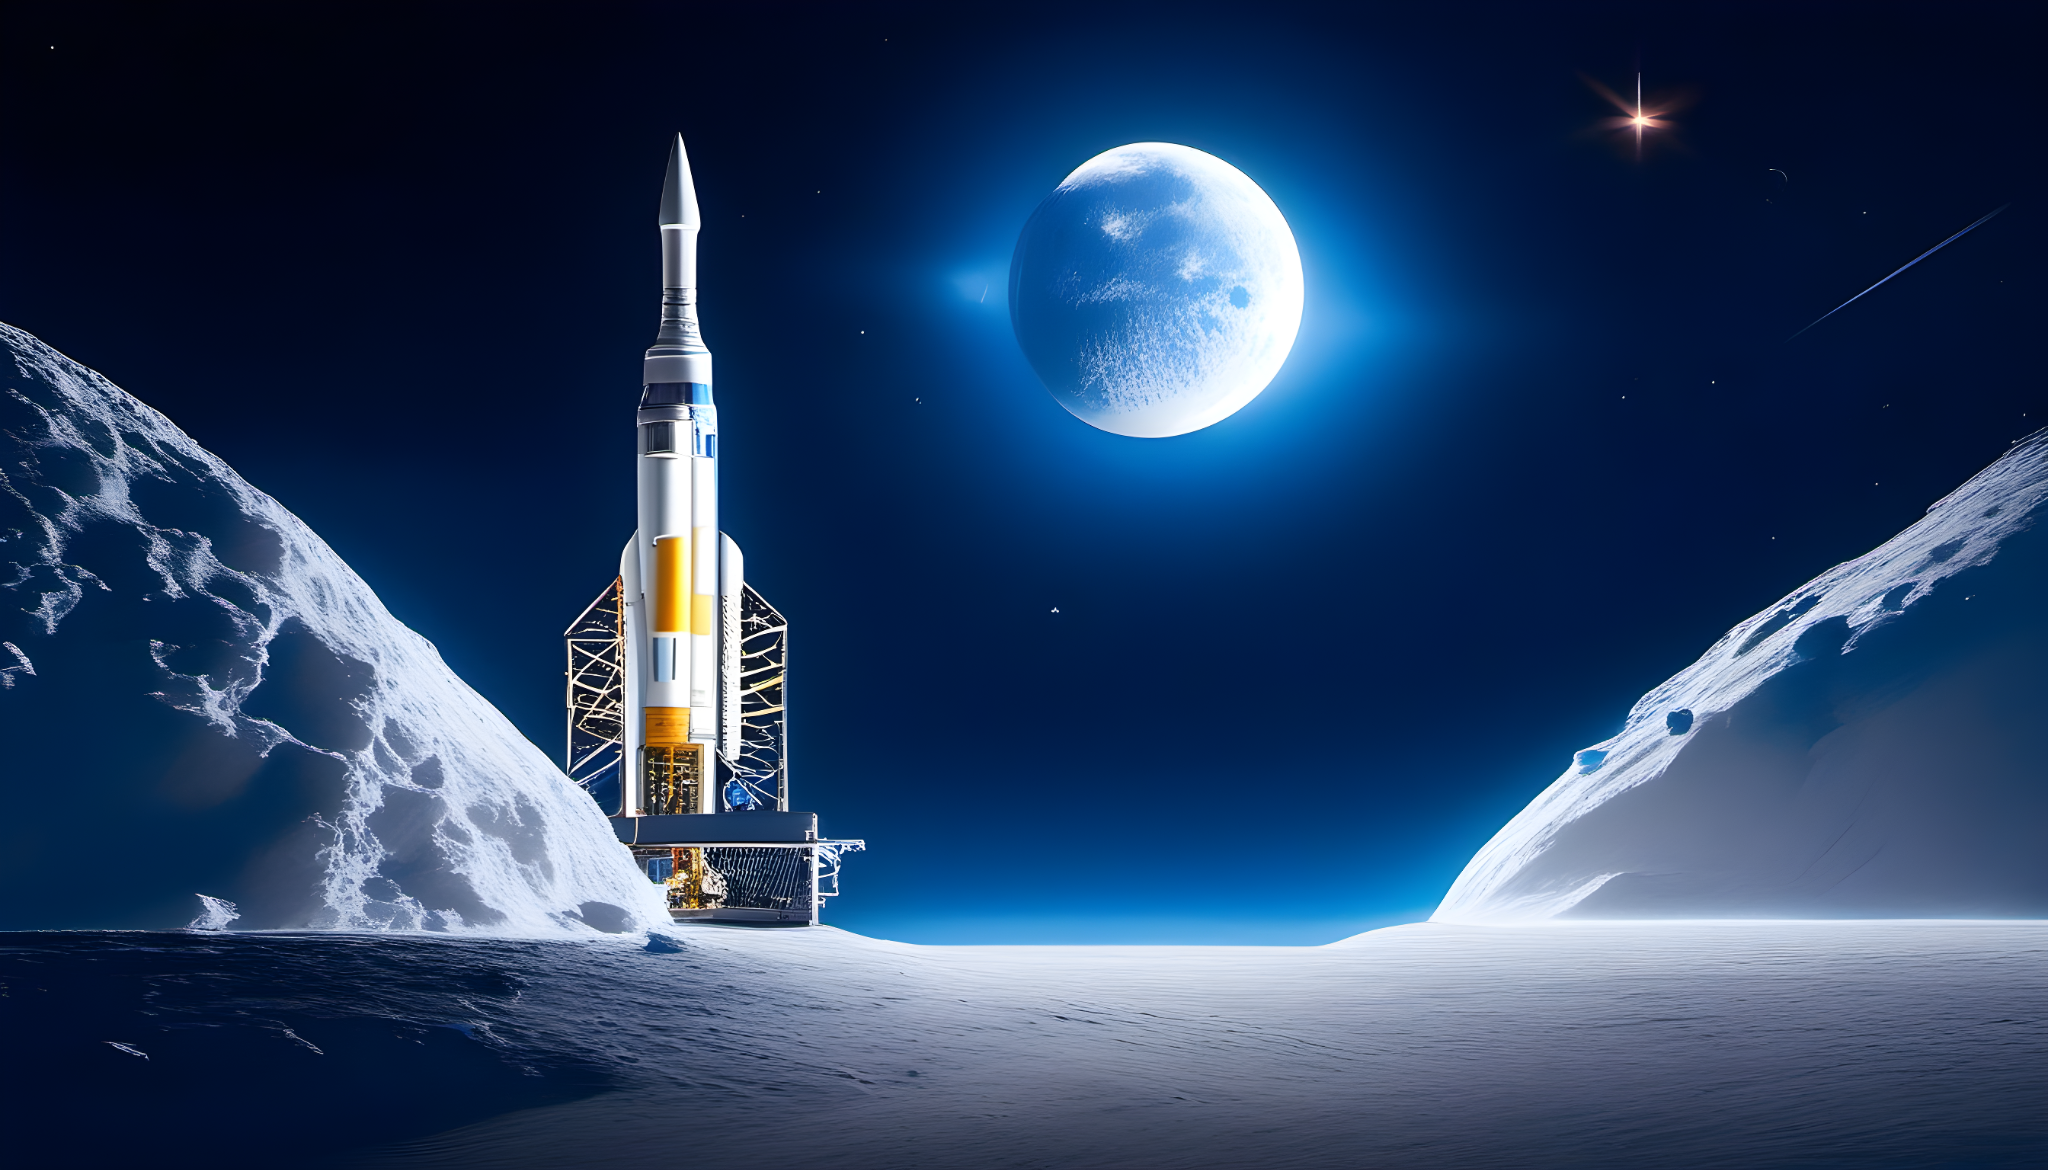 NASA to Launch Nеw Mission to Study thе Moon in 2024